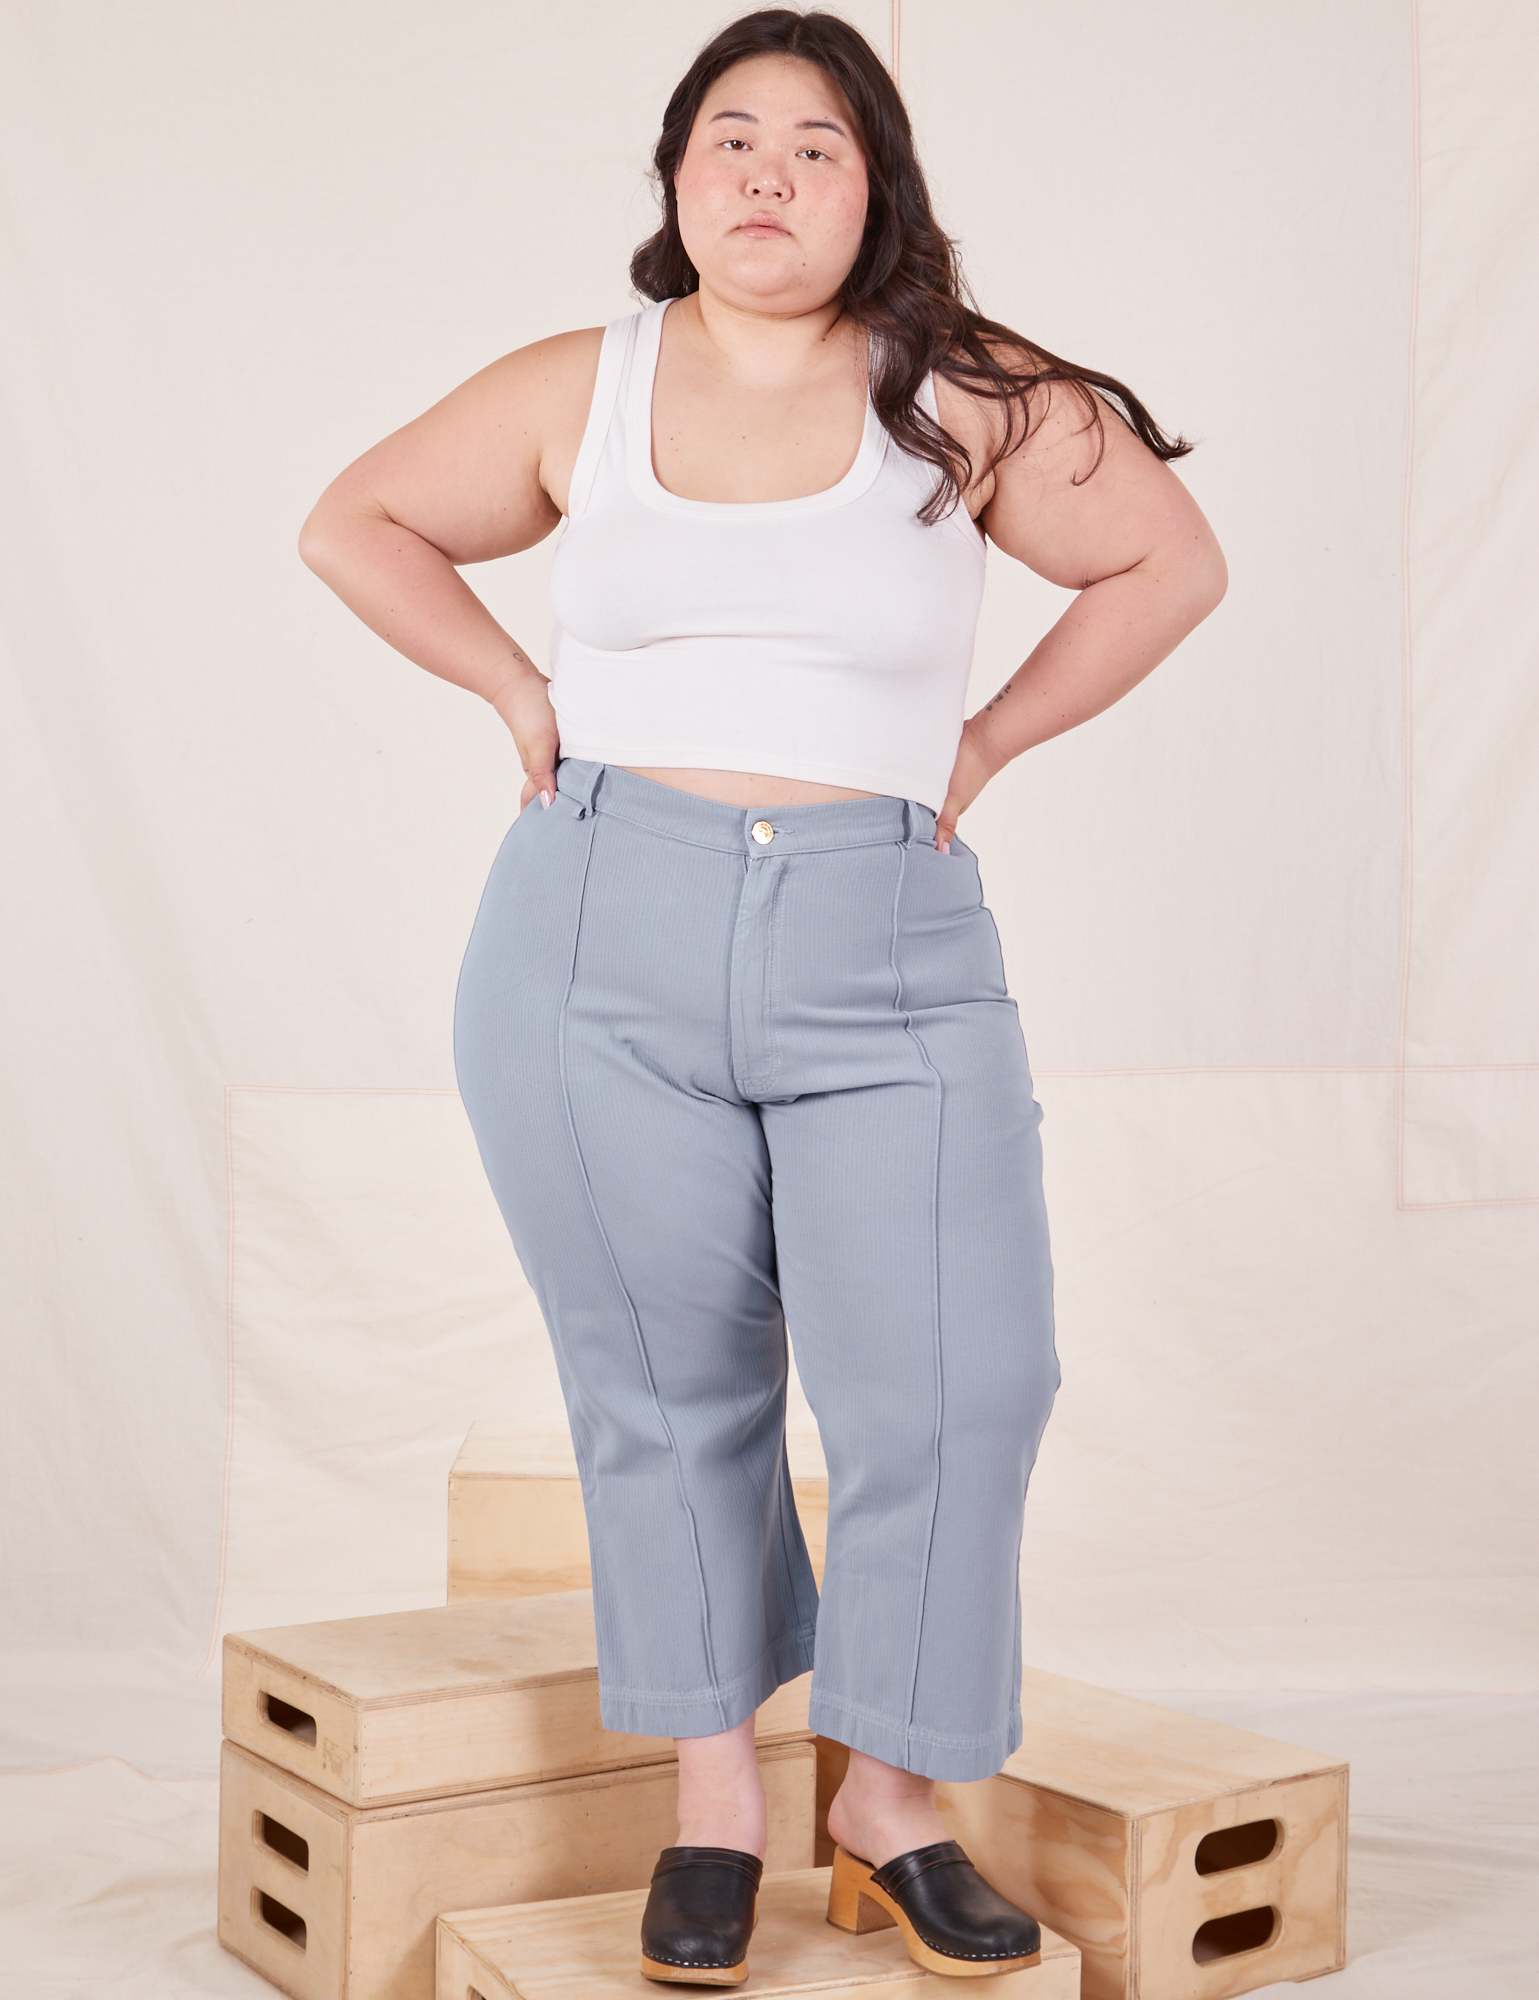 Ashley is 5&#39;7&quot; and wearing 1XL Petite Heritage Westerns in Periwinkle paired with vintage off-white Cropped Tank Top